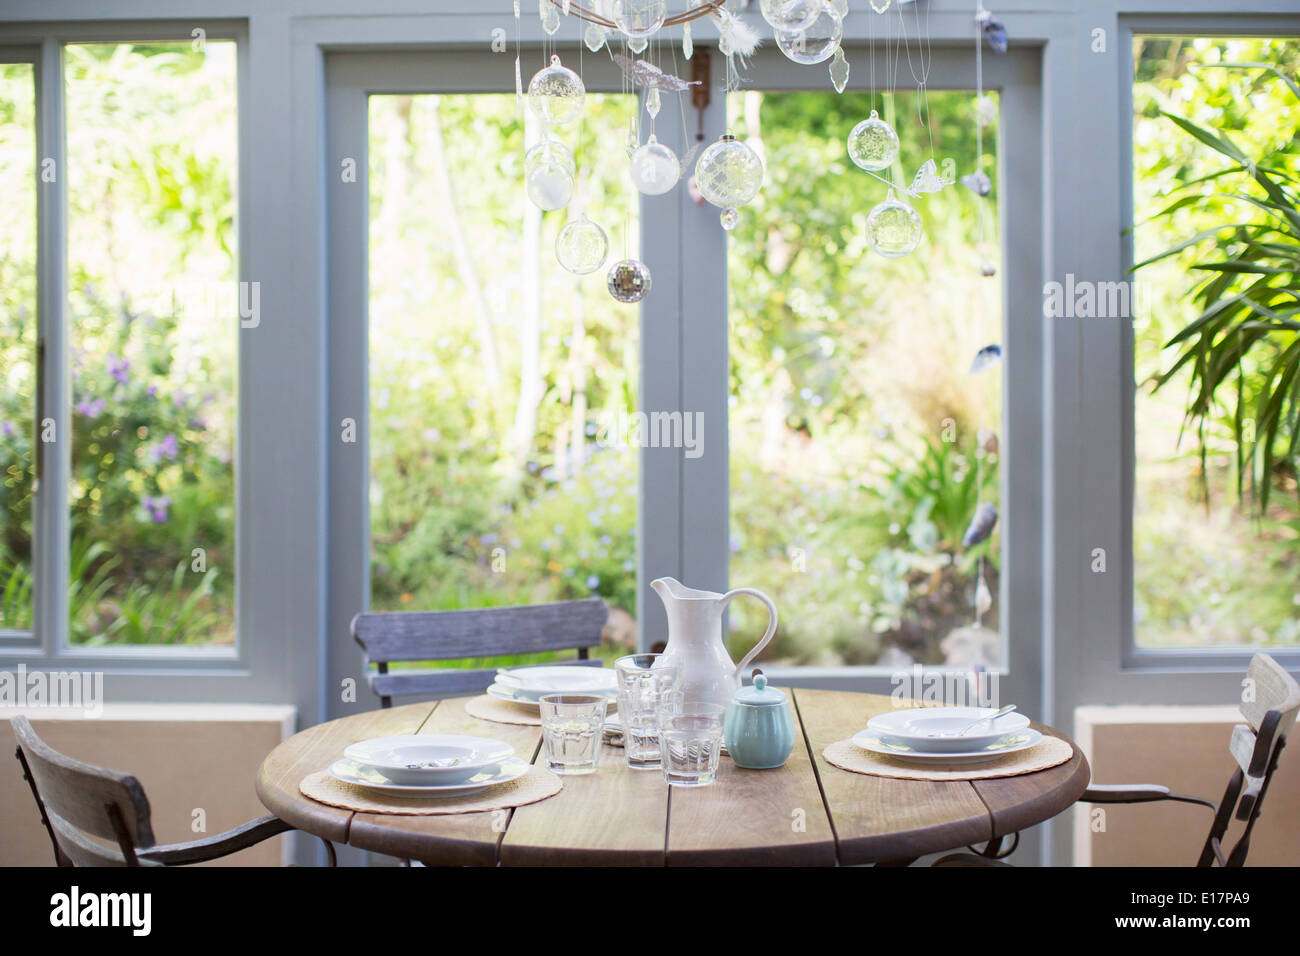 Wooden table in sunroom Stock Photo